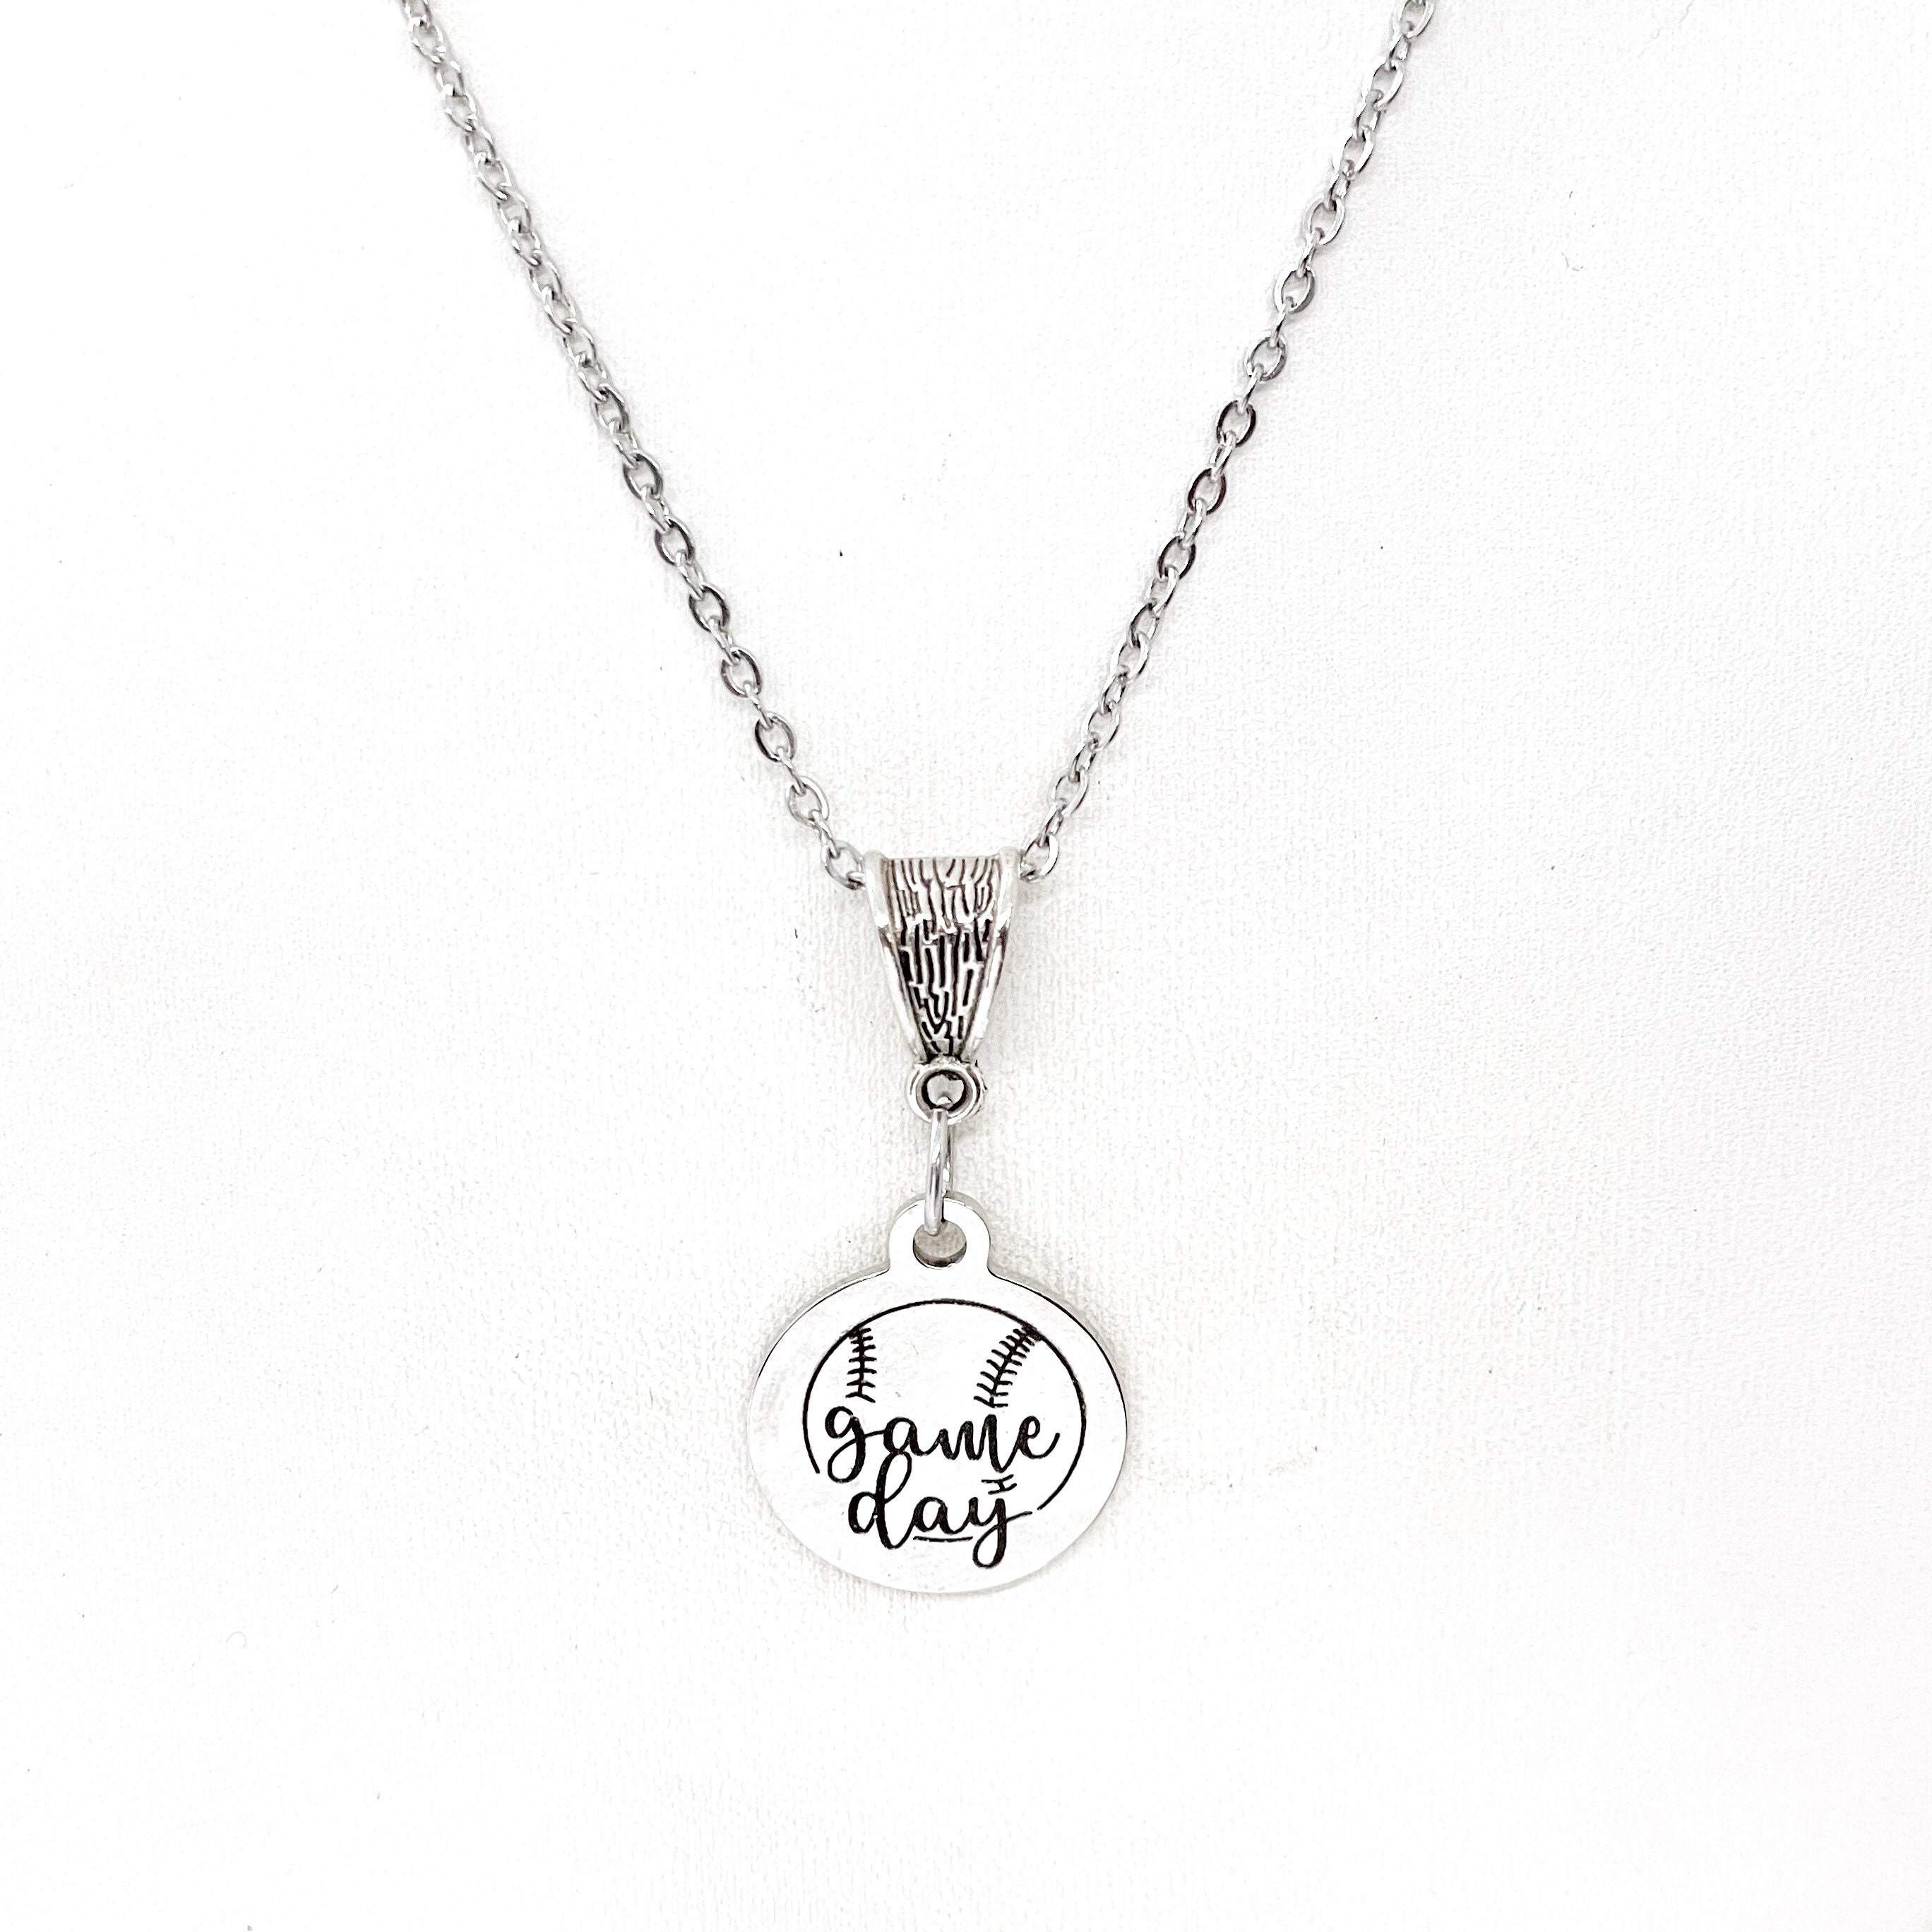 Baseball Heart Necklace - Baseball - to My Mom - Happy Mother's Day - Gnd19007 LED Light Box +